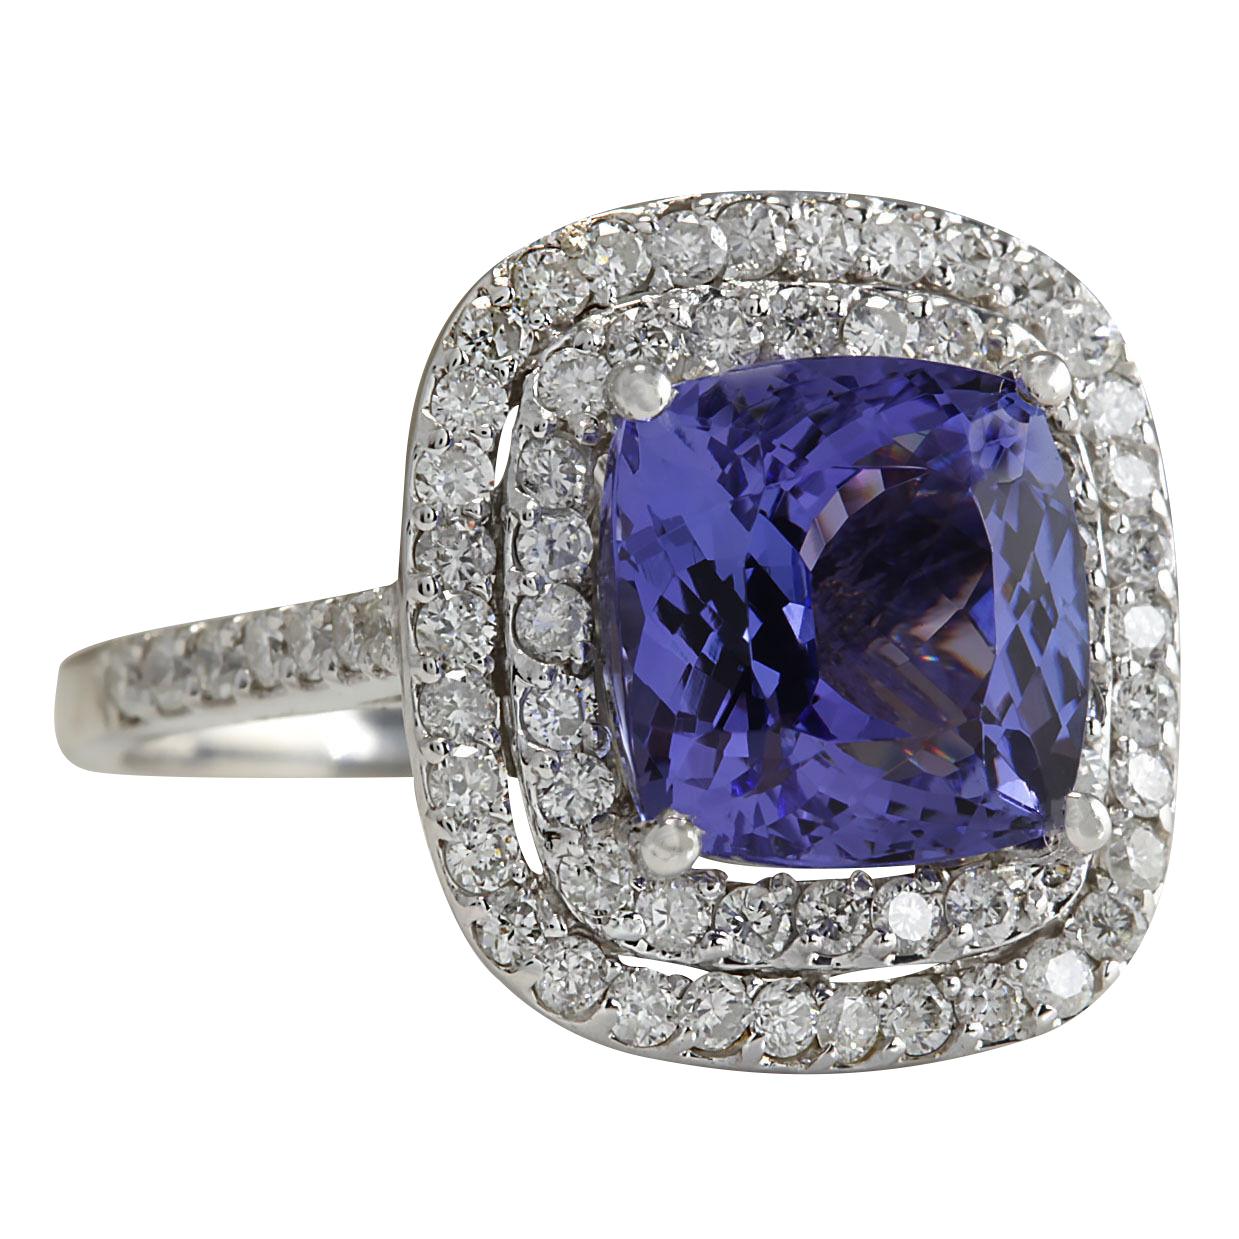 Stamped: 14K White Gold
Total Ring Weight: 5.5 Grams
Total Natural Tanzanite Weight is 4.92 Carat (Measures: 9.50x9.50 mm)
Color: Blue
Total Natural Diamond Weight is 1.17 Carat
Color: F-G, Clarity: VS2-SI1
Face Measures: 16.85x15.70 mm
Sku: